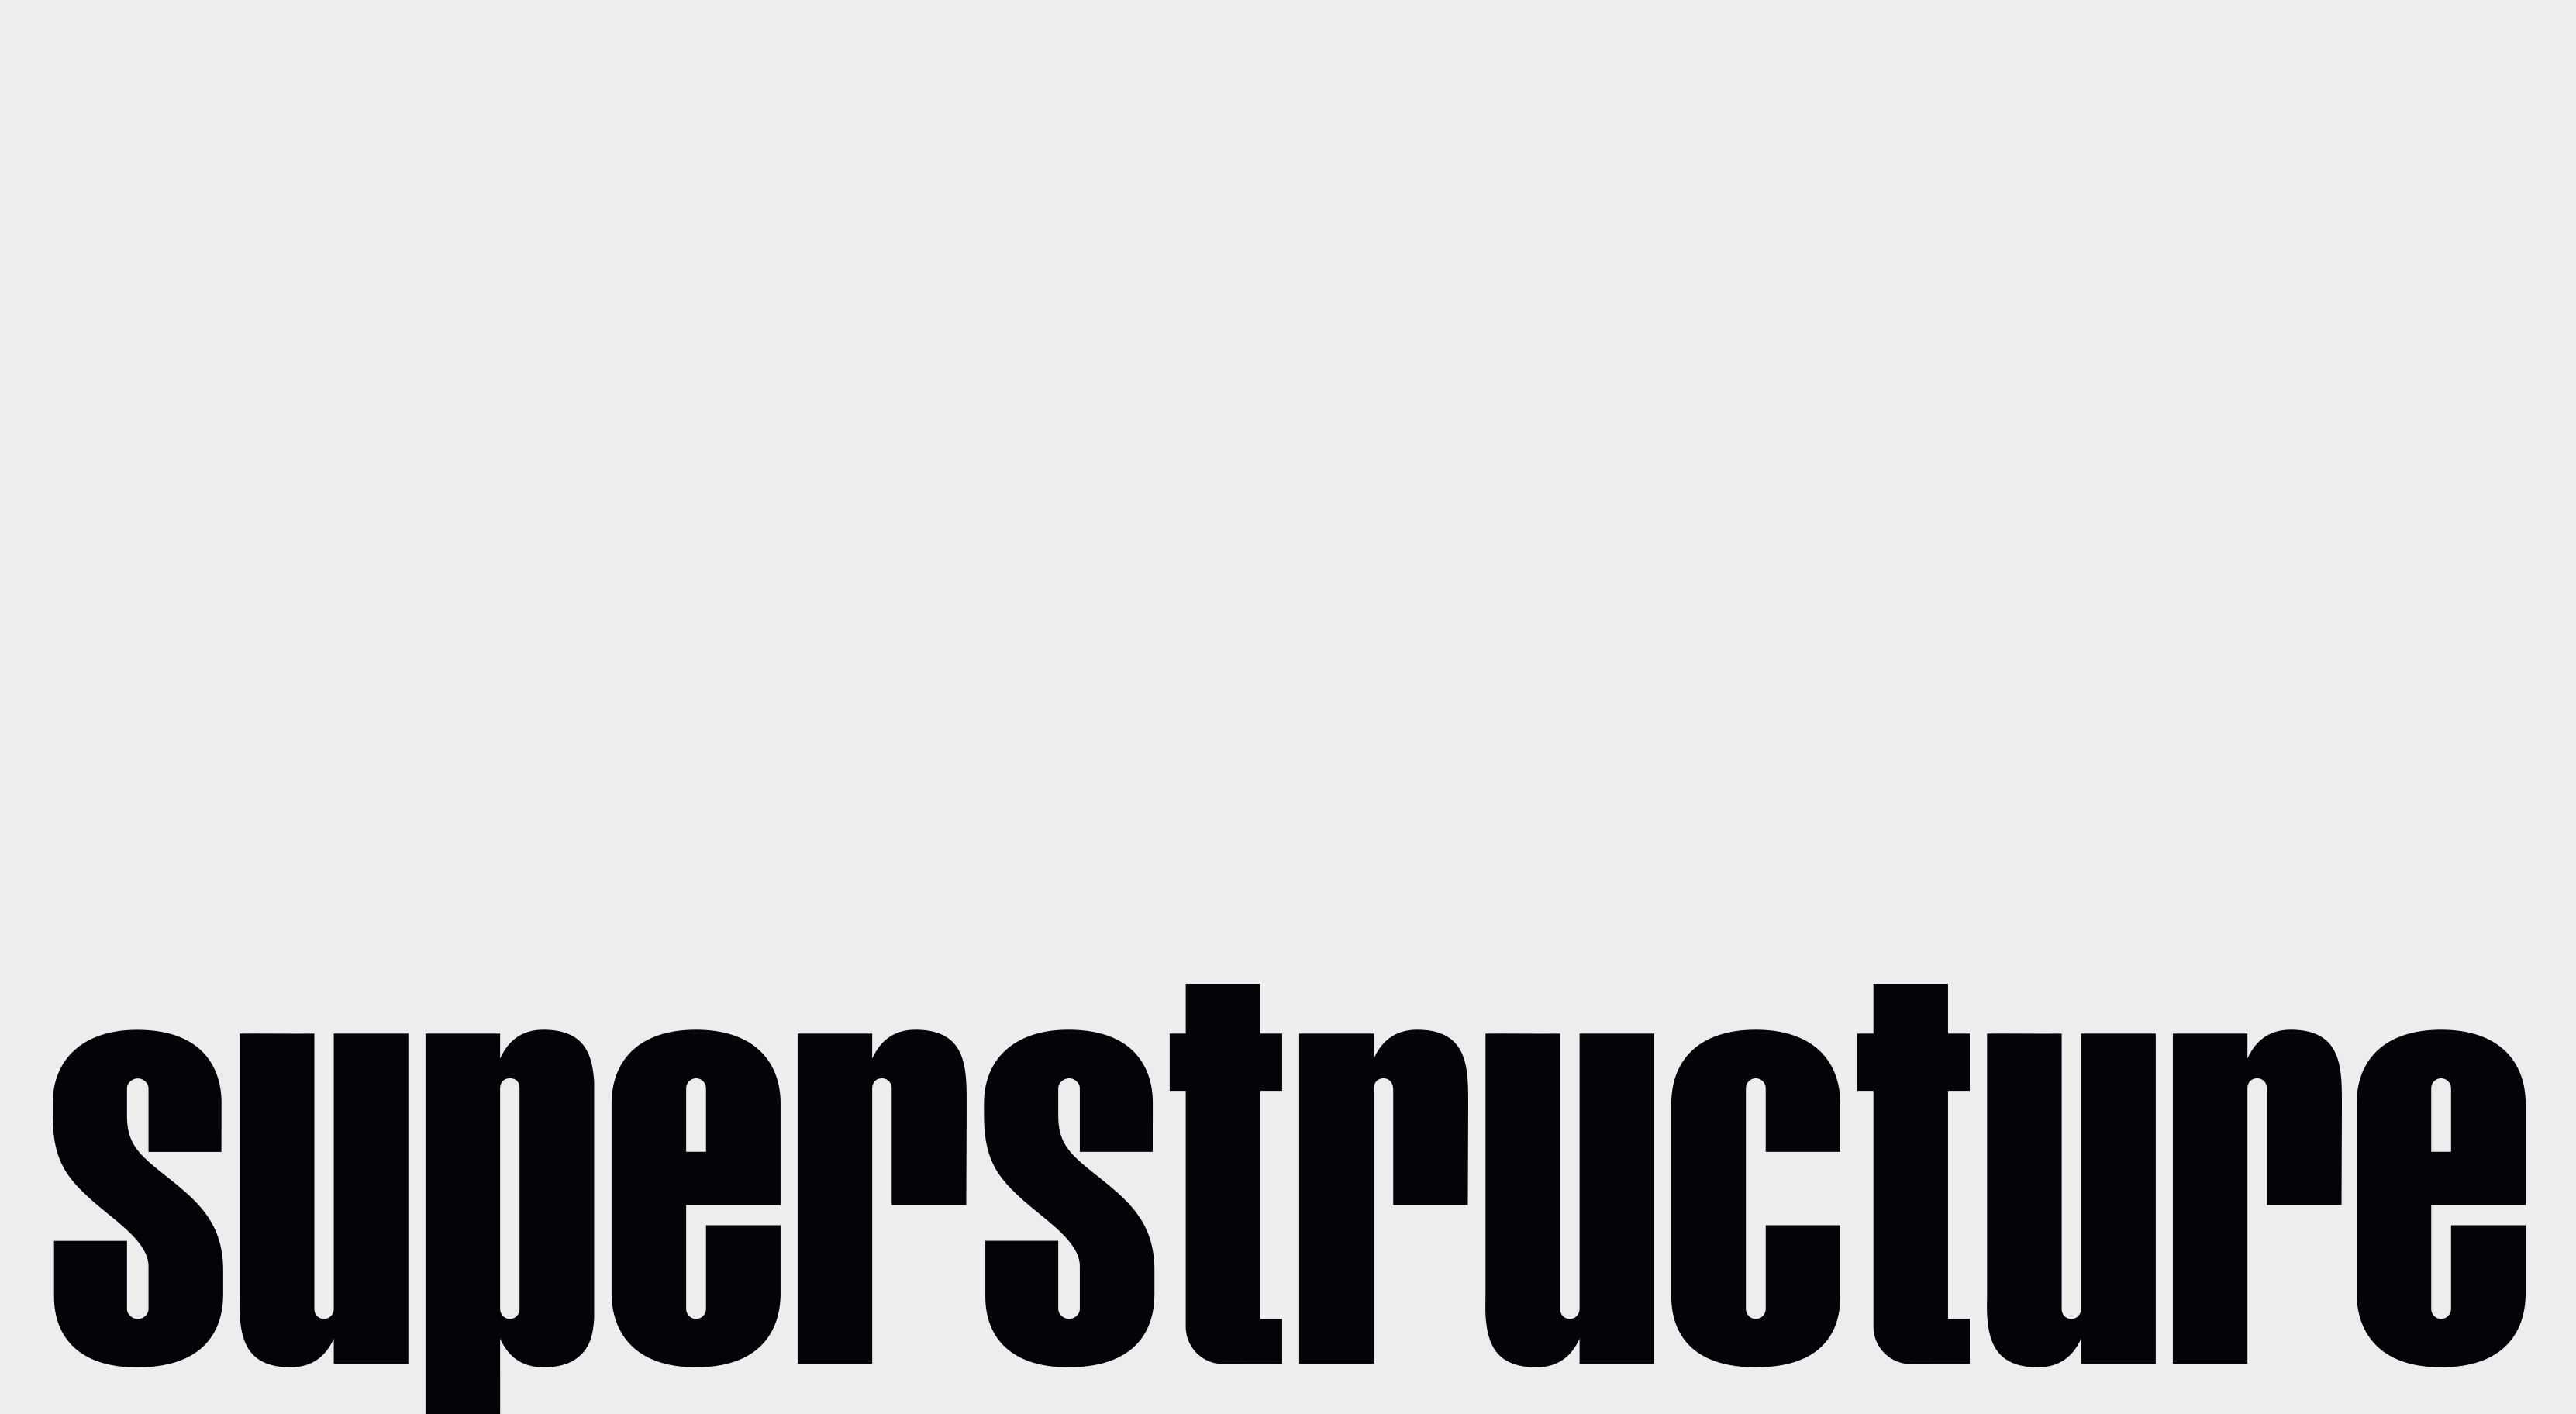 Graphic design and logotype design for Superstructure production, art direction, visual identity